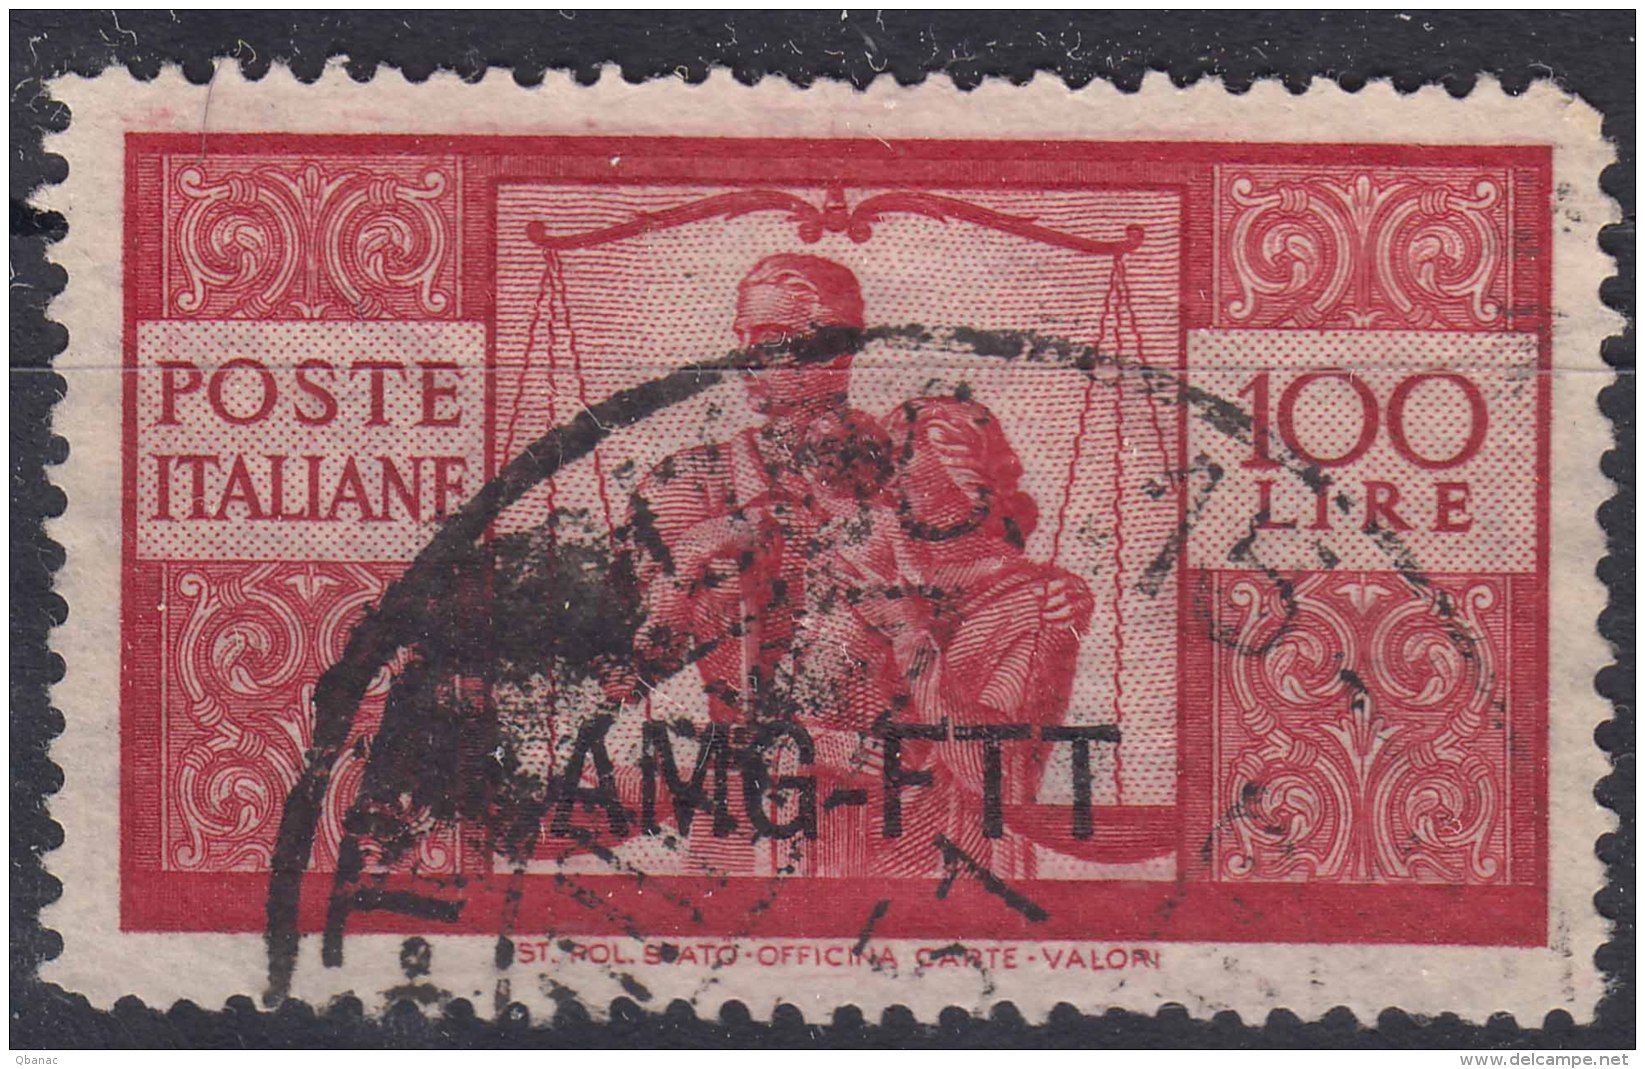 Italy Trieste Zone A AMG-FTT 1949 Sassone#67 Used - Afgestempeld